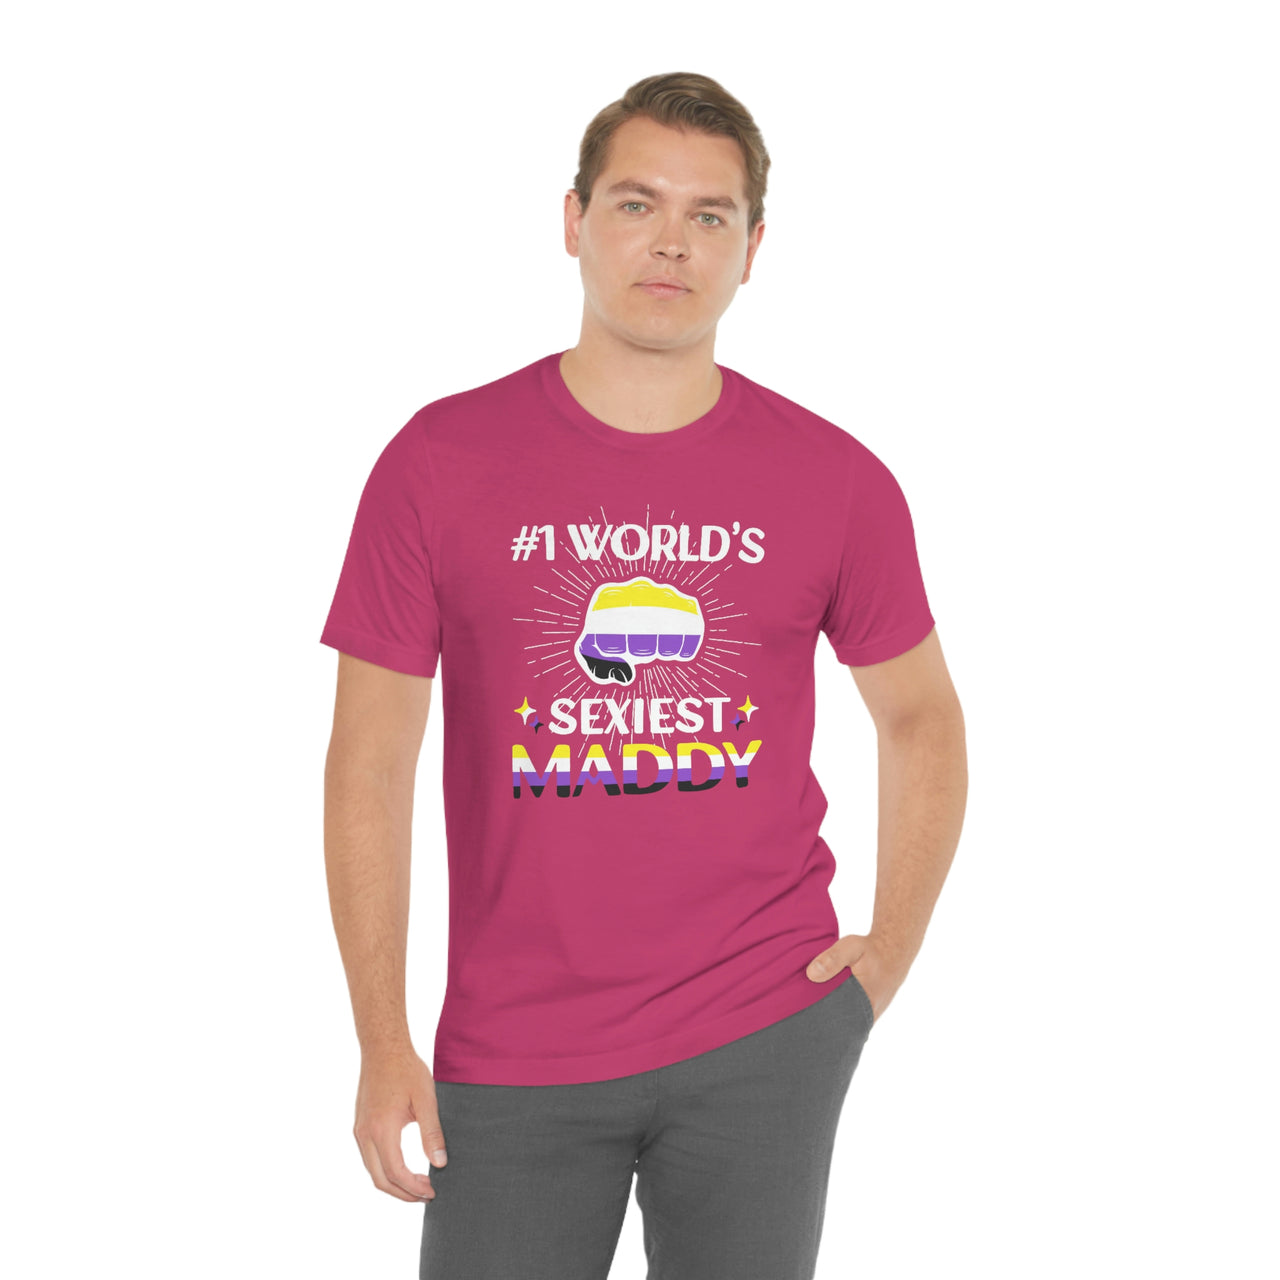 Nonbinary Pride Flag Mother's Day Unisex Short Sleeve Tee - #1 World's Gayest Mom SHAVA CO